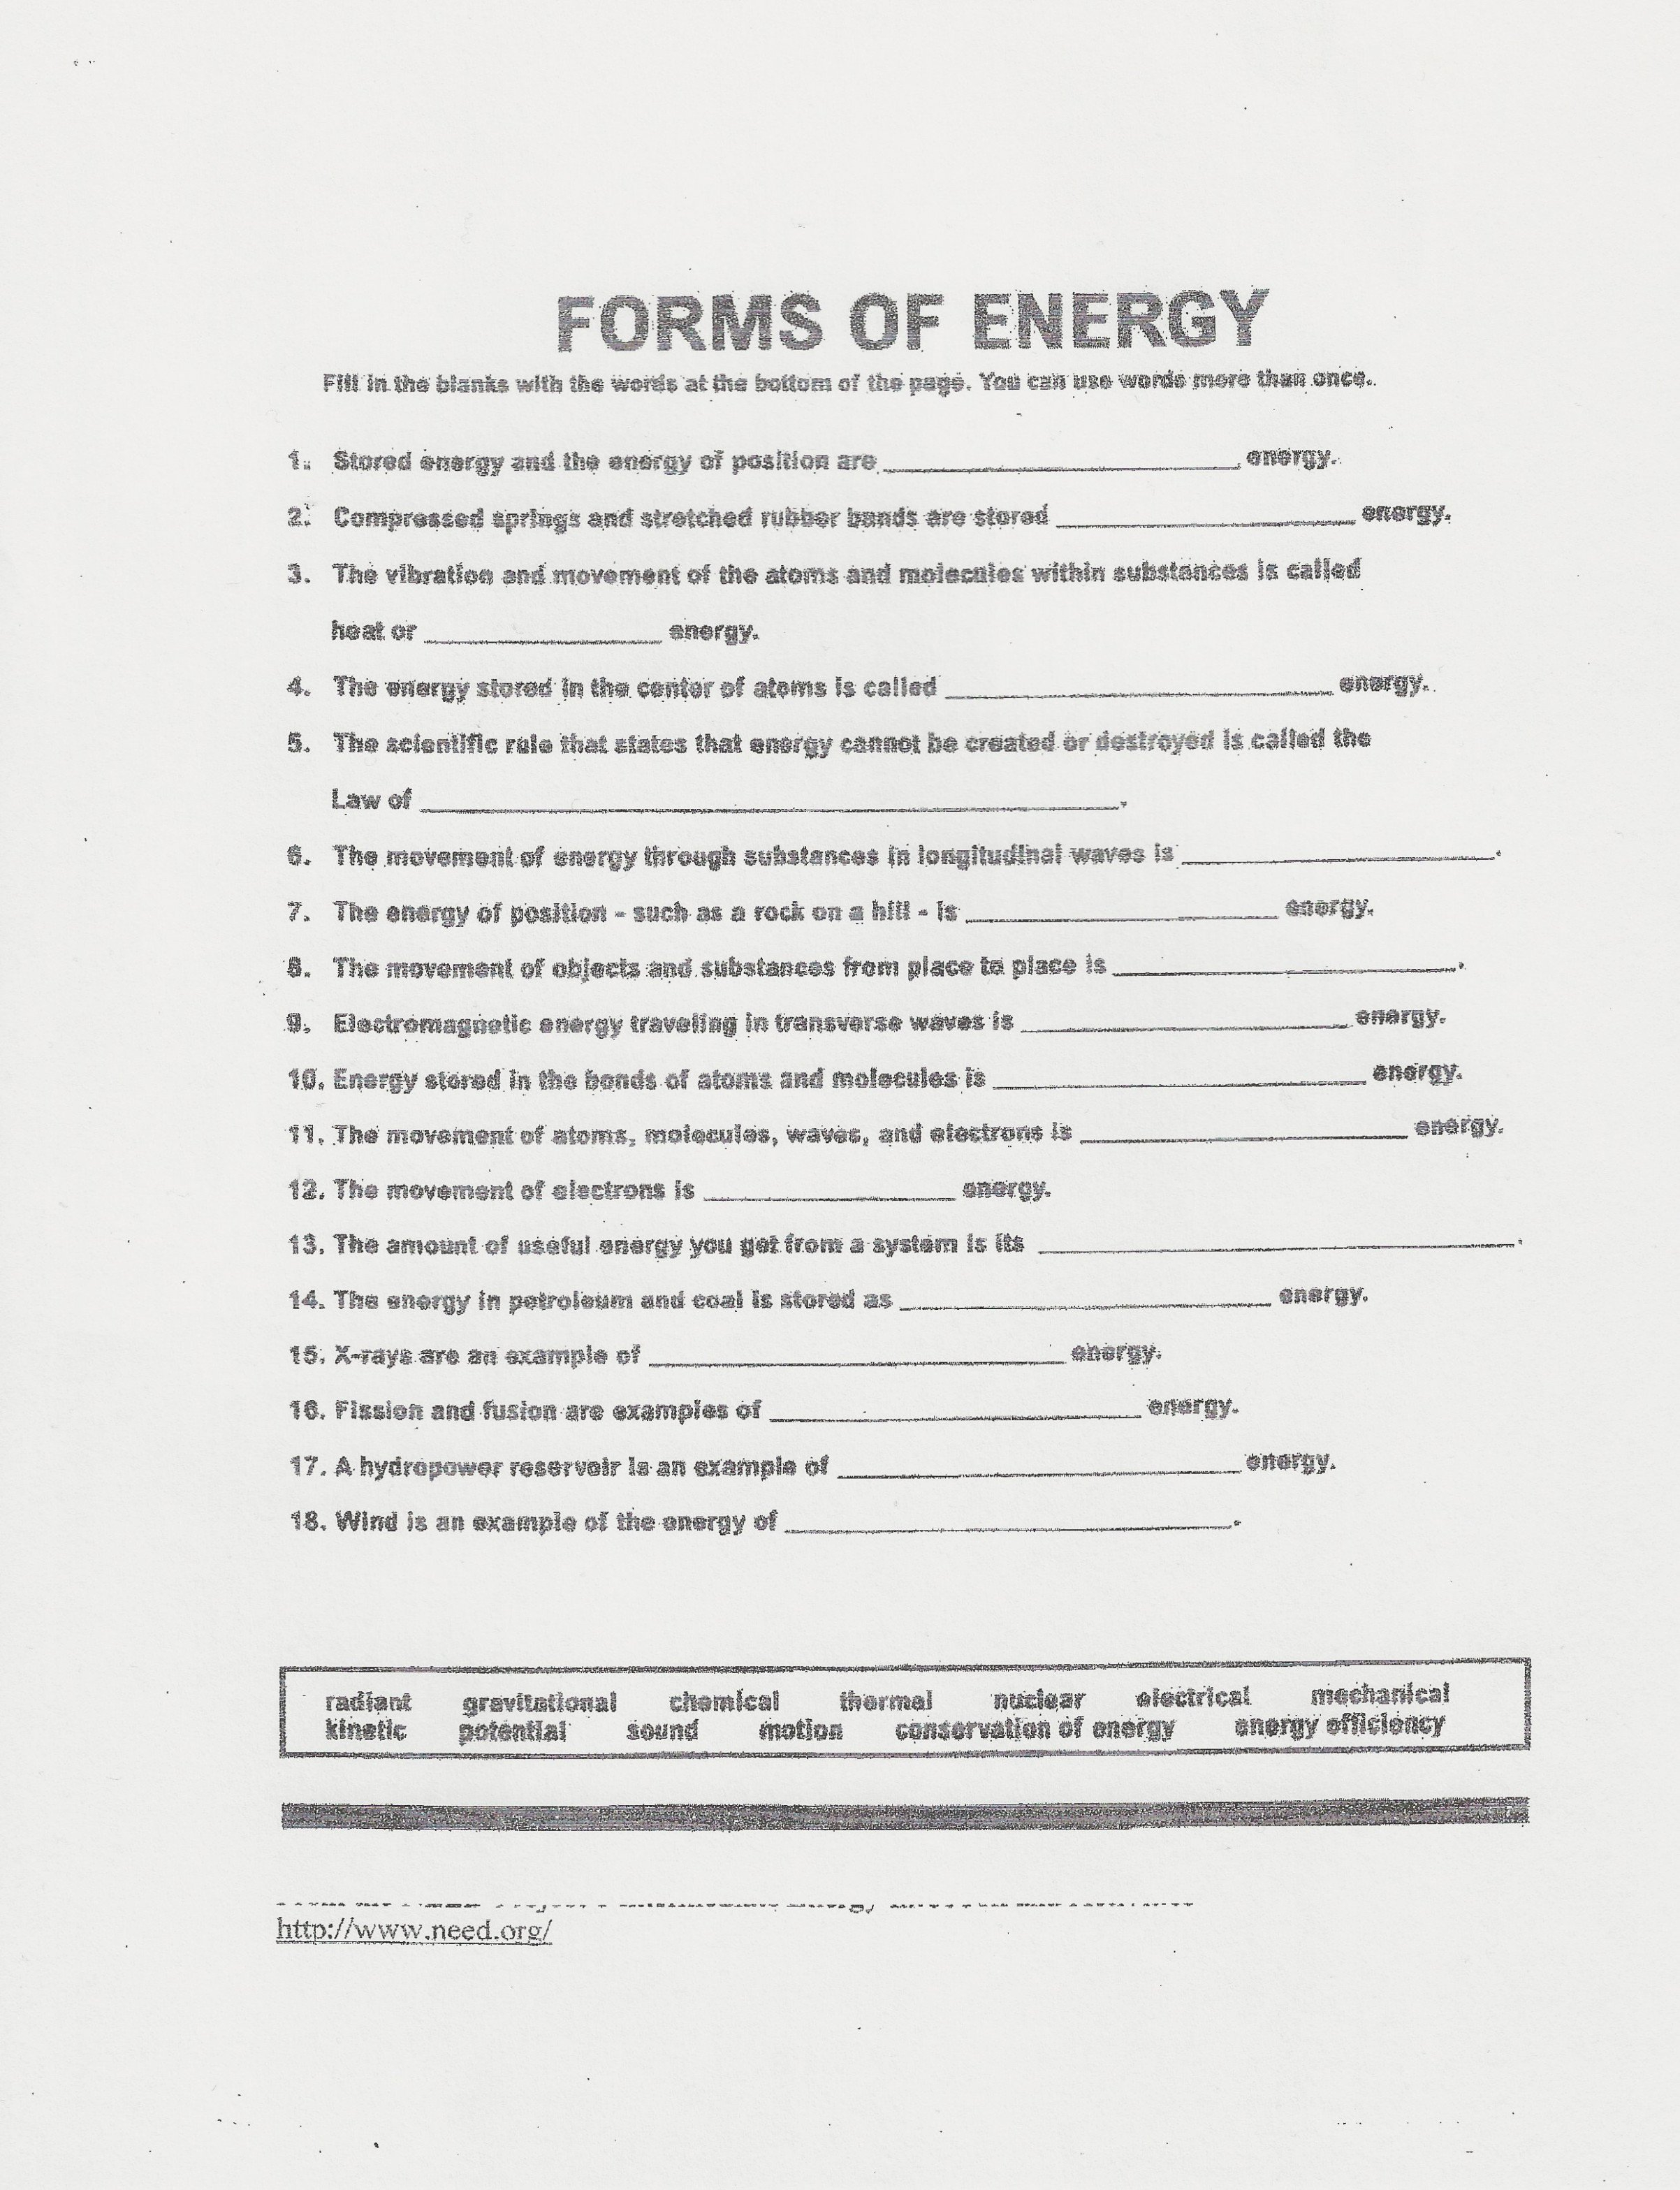 Forms Of Energy Worksheet Answer Key The Best Worksheets Image Also Forms Of Energy Worksheet Answer Key